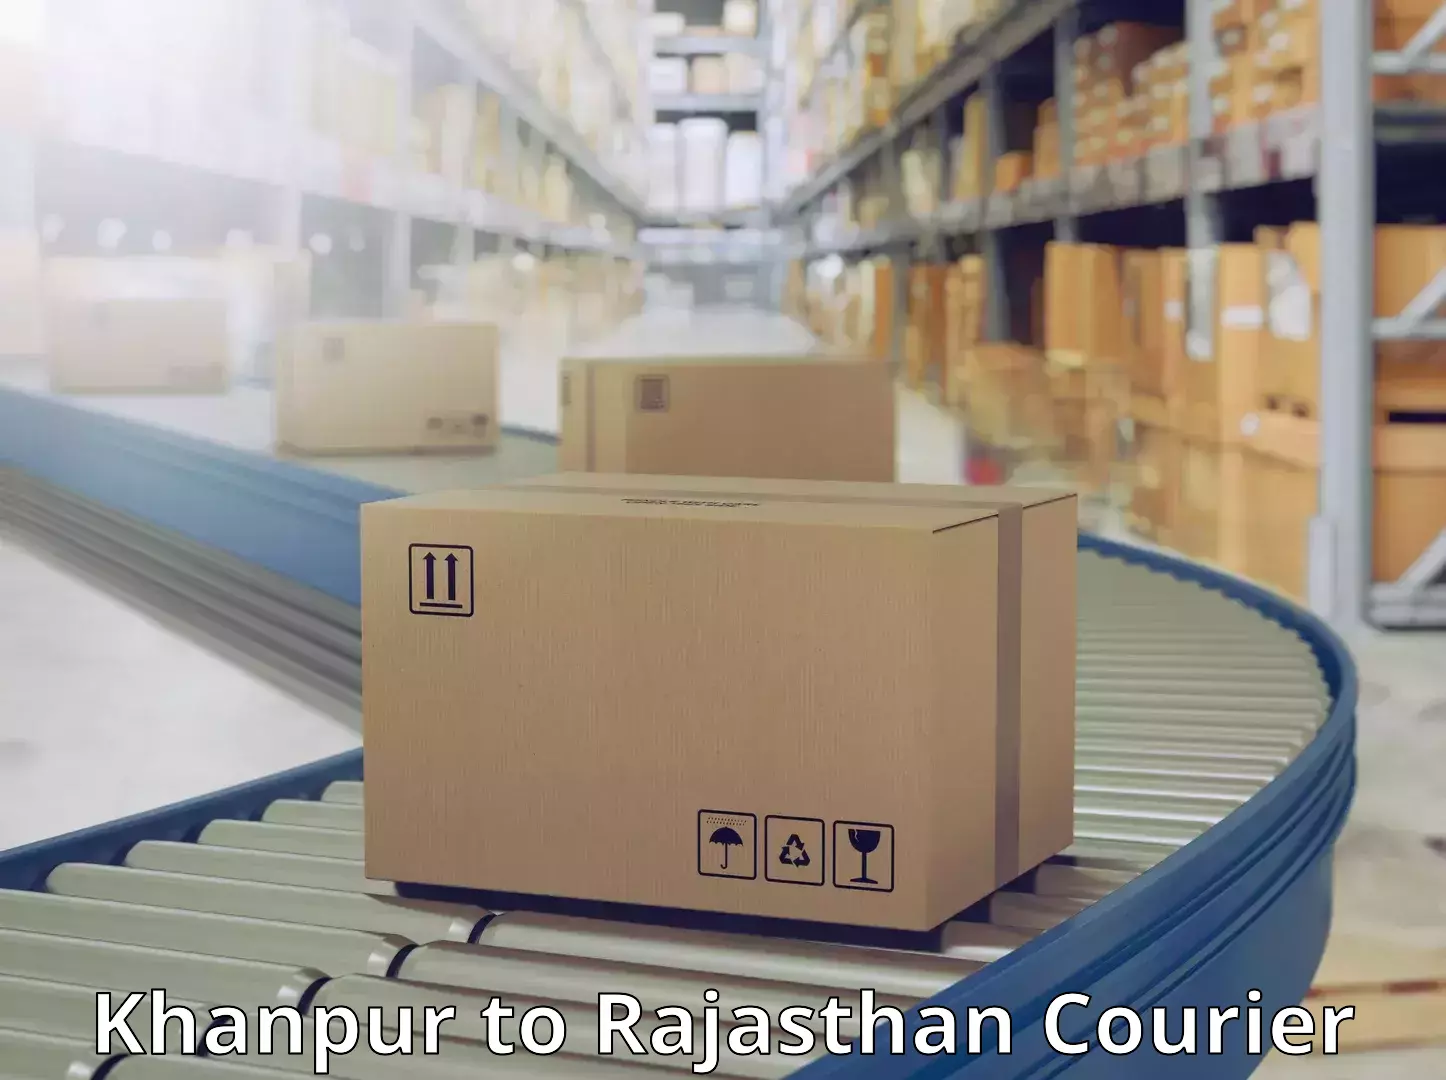 Lightweight parcel options Khanpur to Dholpur